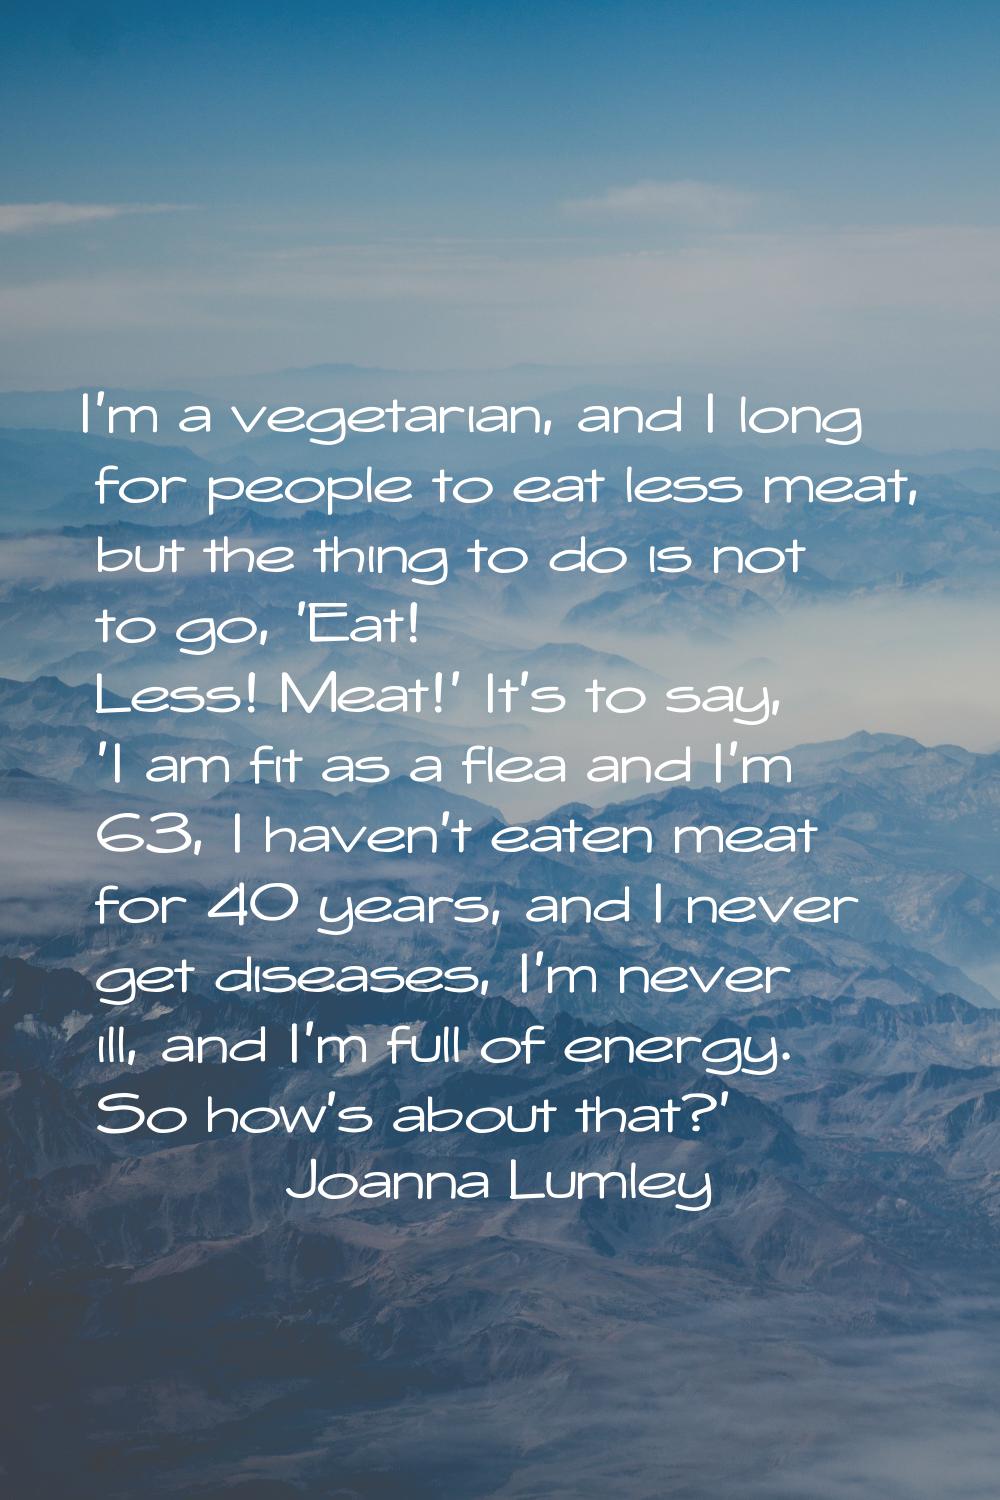 I'm a vegetarian, and I long for people to eat less meat, but the thing to do is not to go, 'Eat! L